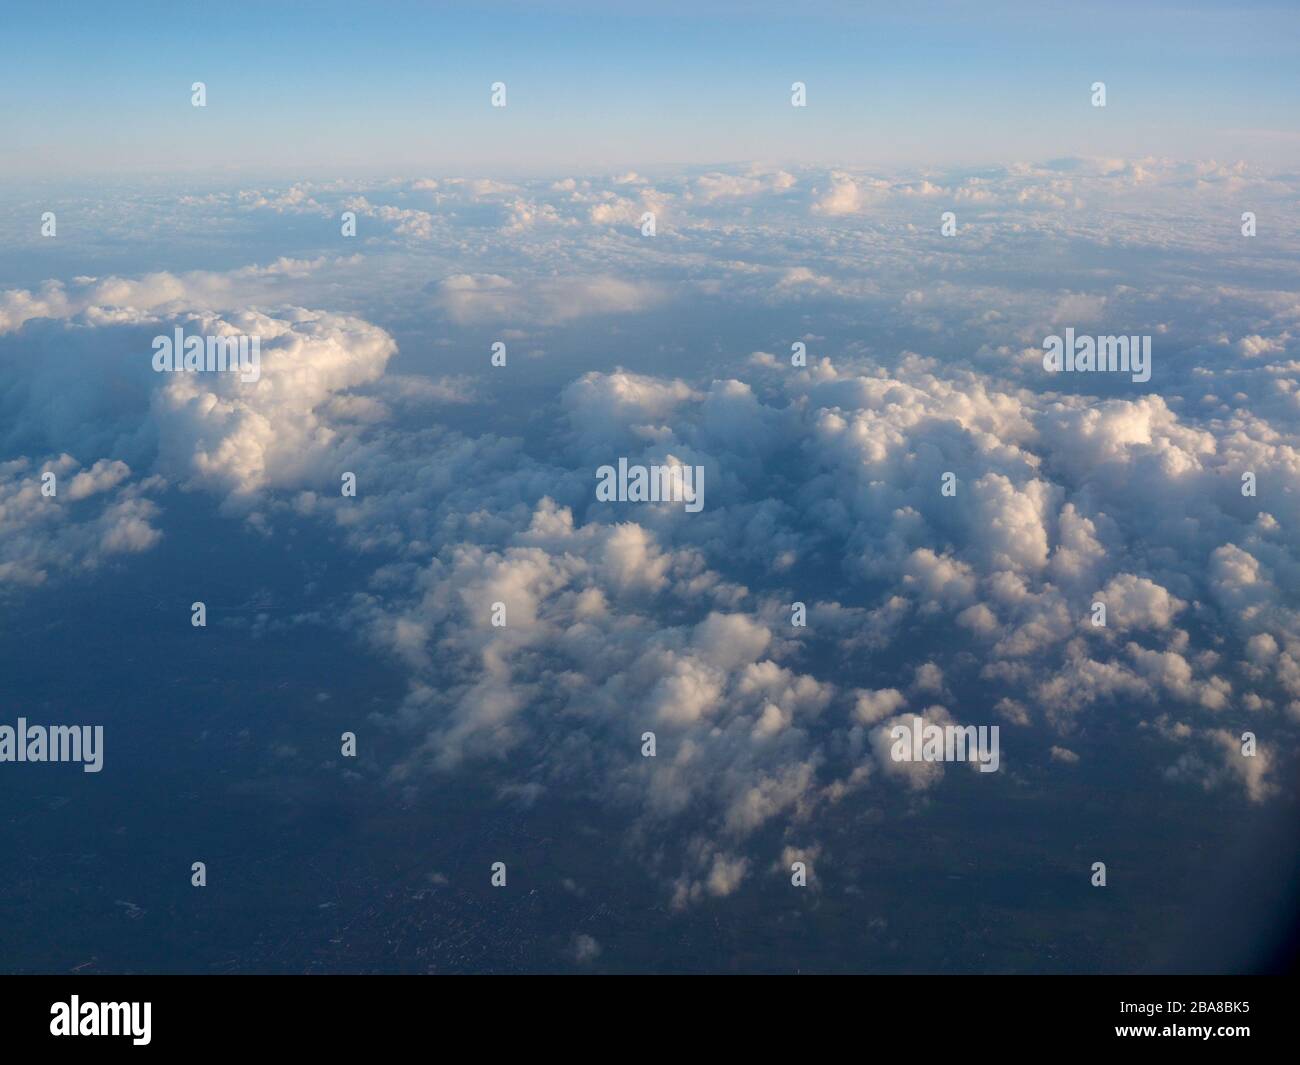 Little clouds over Spain, Europe seen from an aeroplane Stock Photo